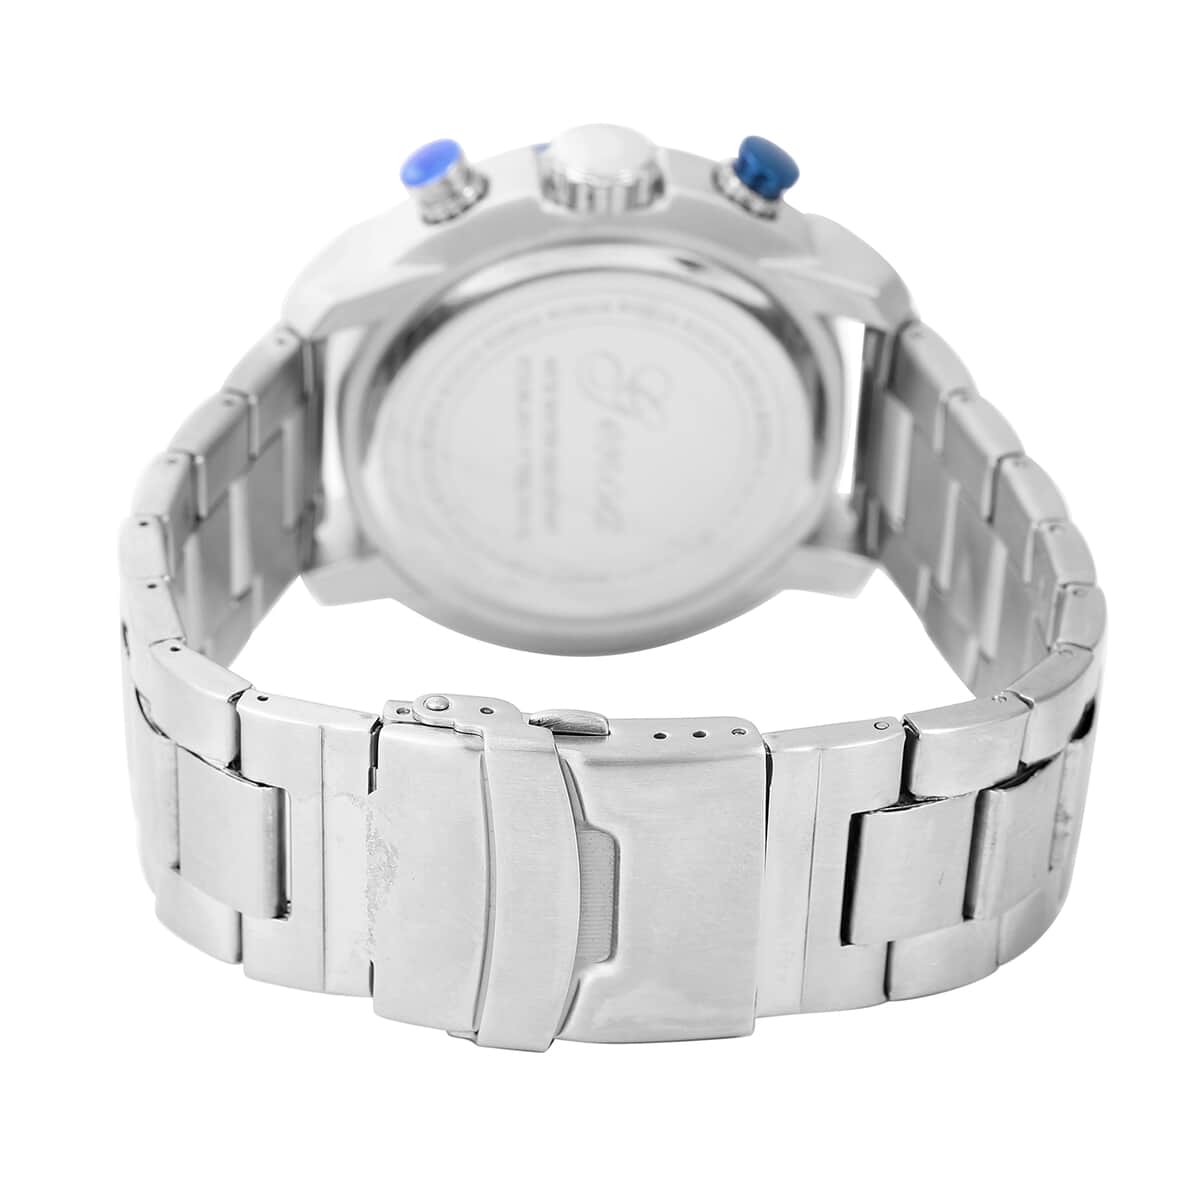 GENOA Multi-Functional Quartz Movement Watch with Blue Dial & Stainless Steel Strap (49.5 mm) image number 4